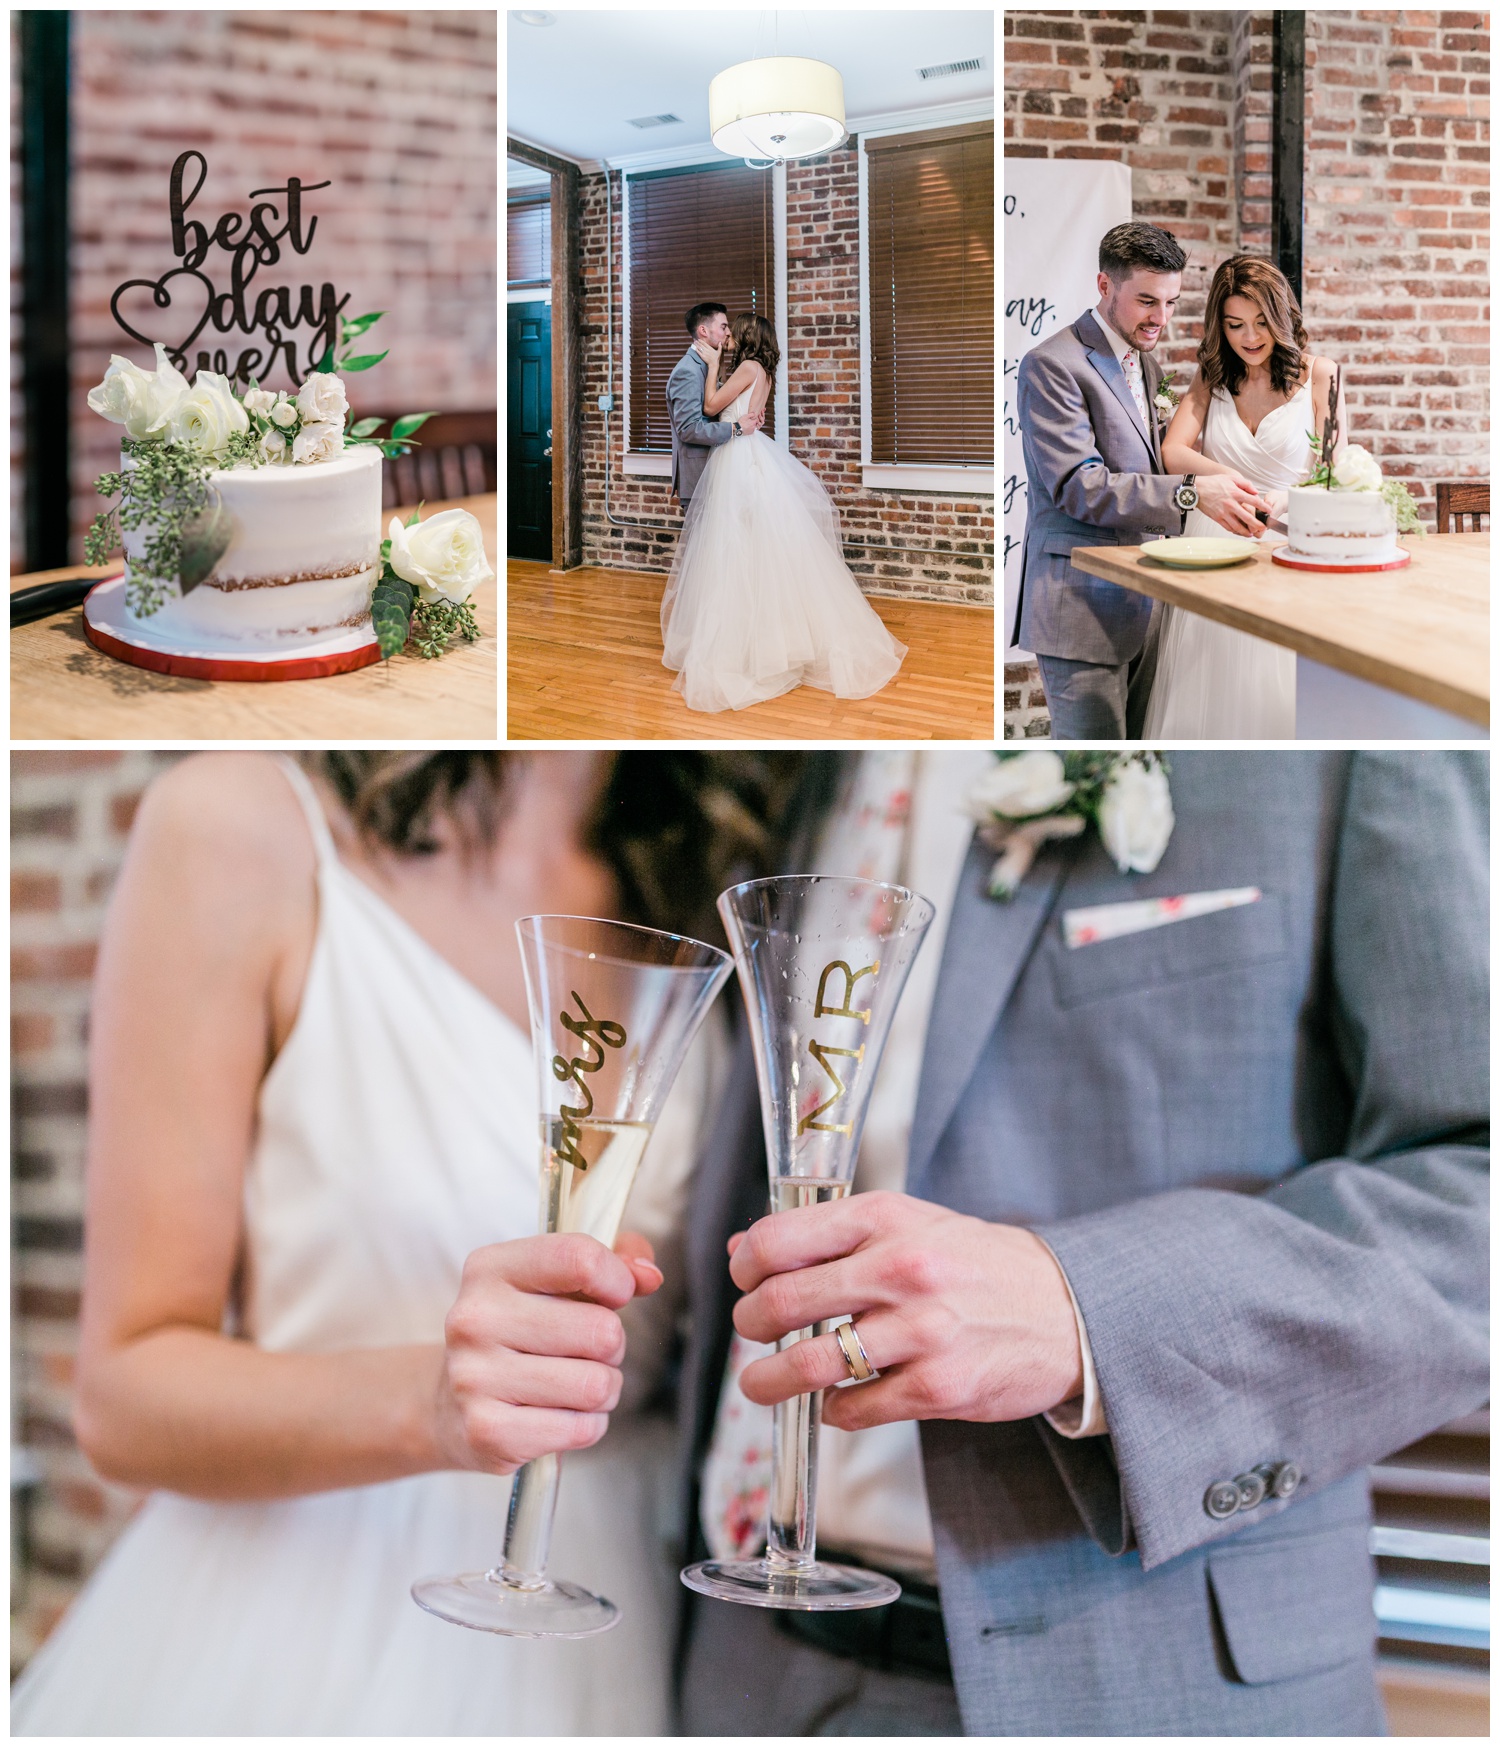 cake cutting - the savannah elopement package - cake by Wicked Cakes of Savannah